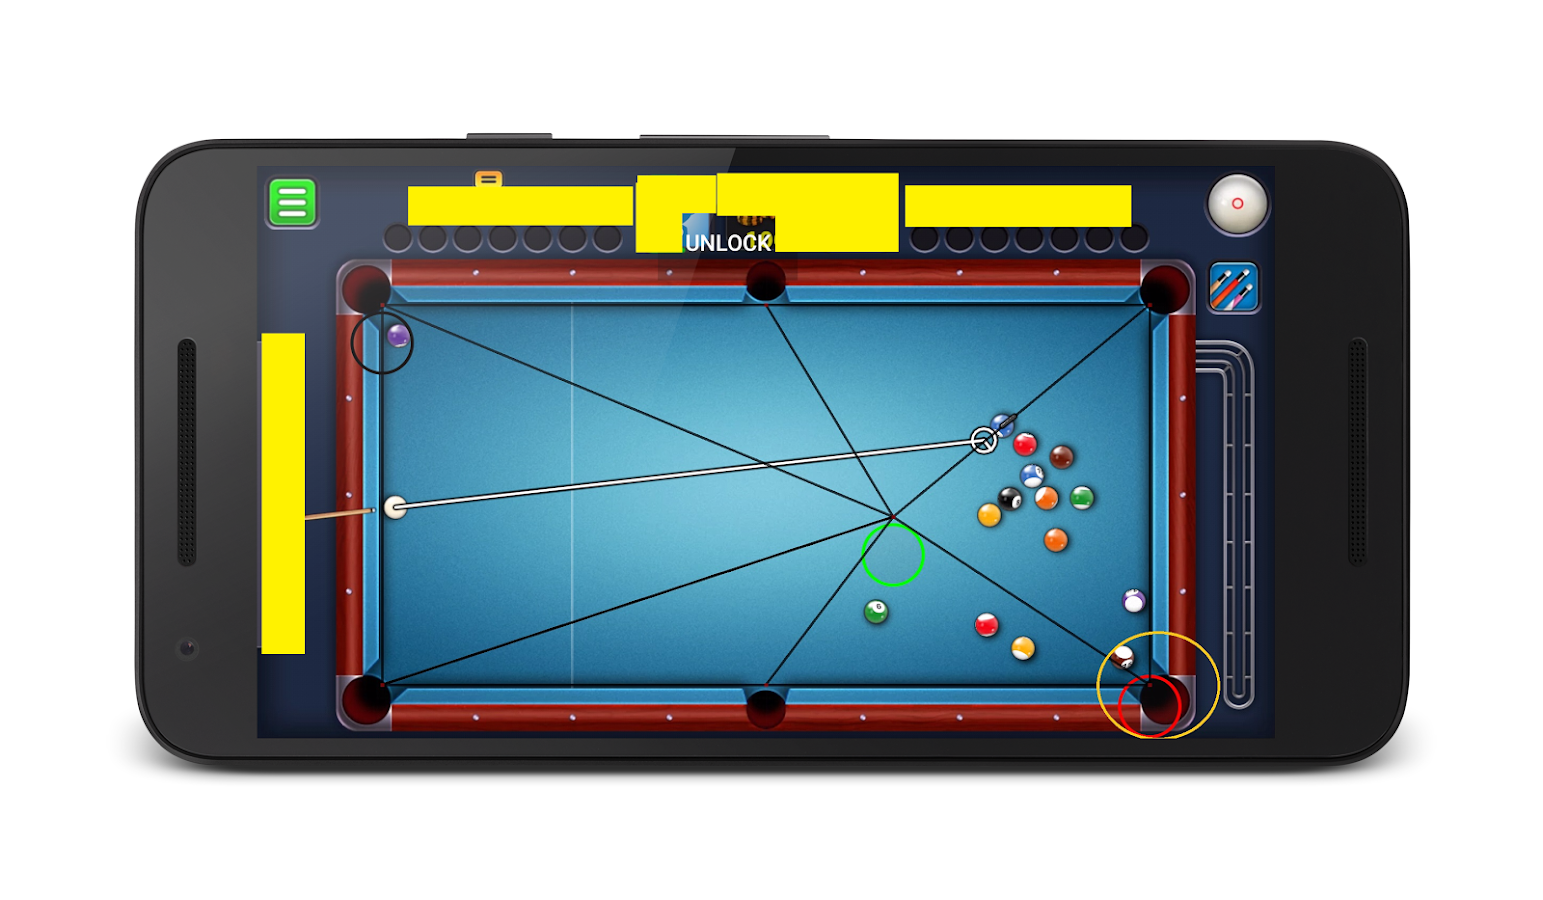 8 Ball Pool Tool 1.5.6 APK Download - Android Tools Apps - 